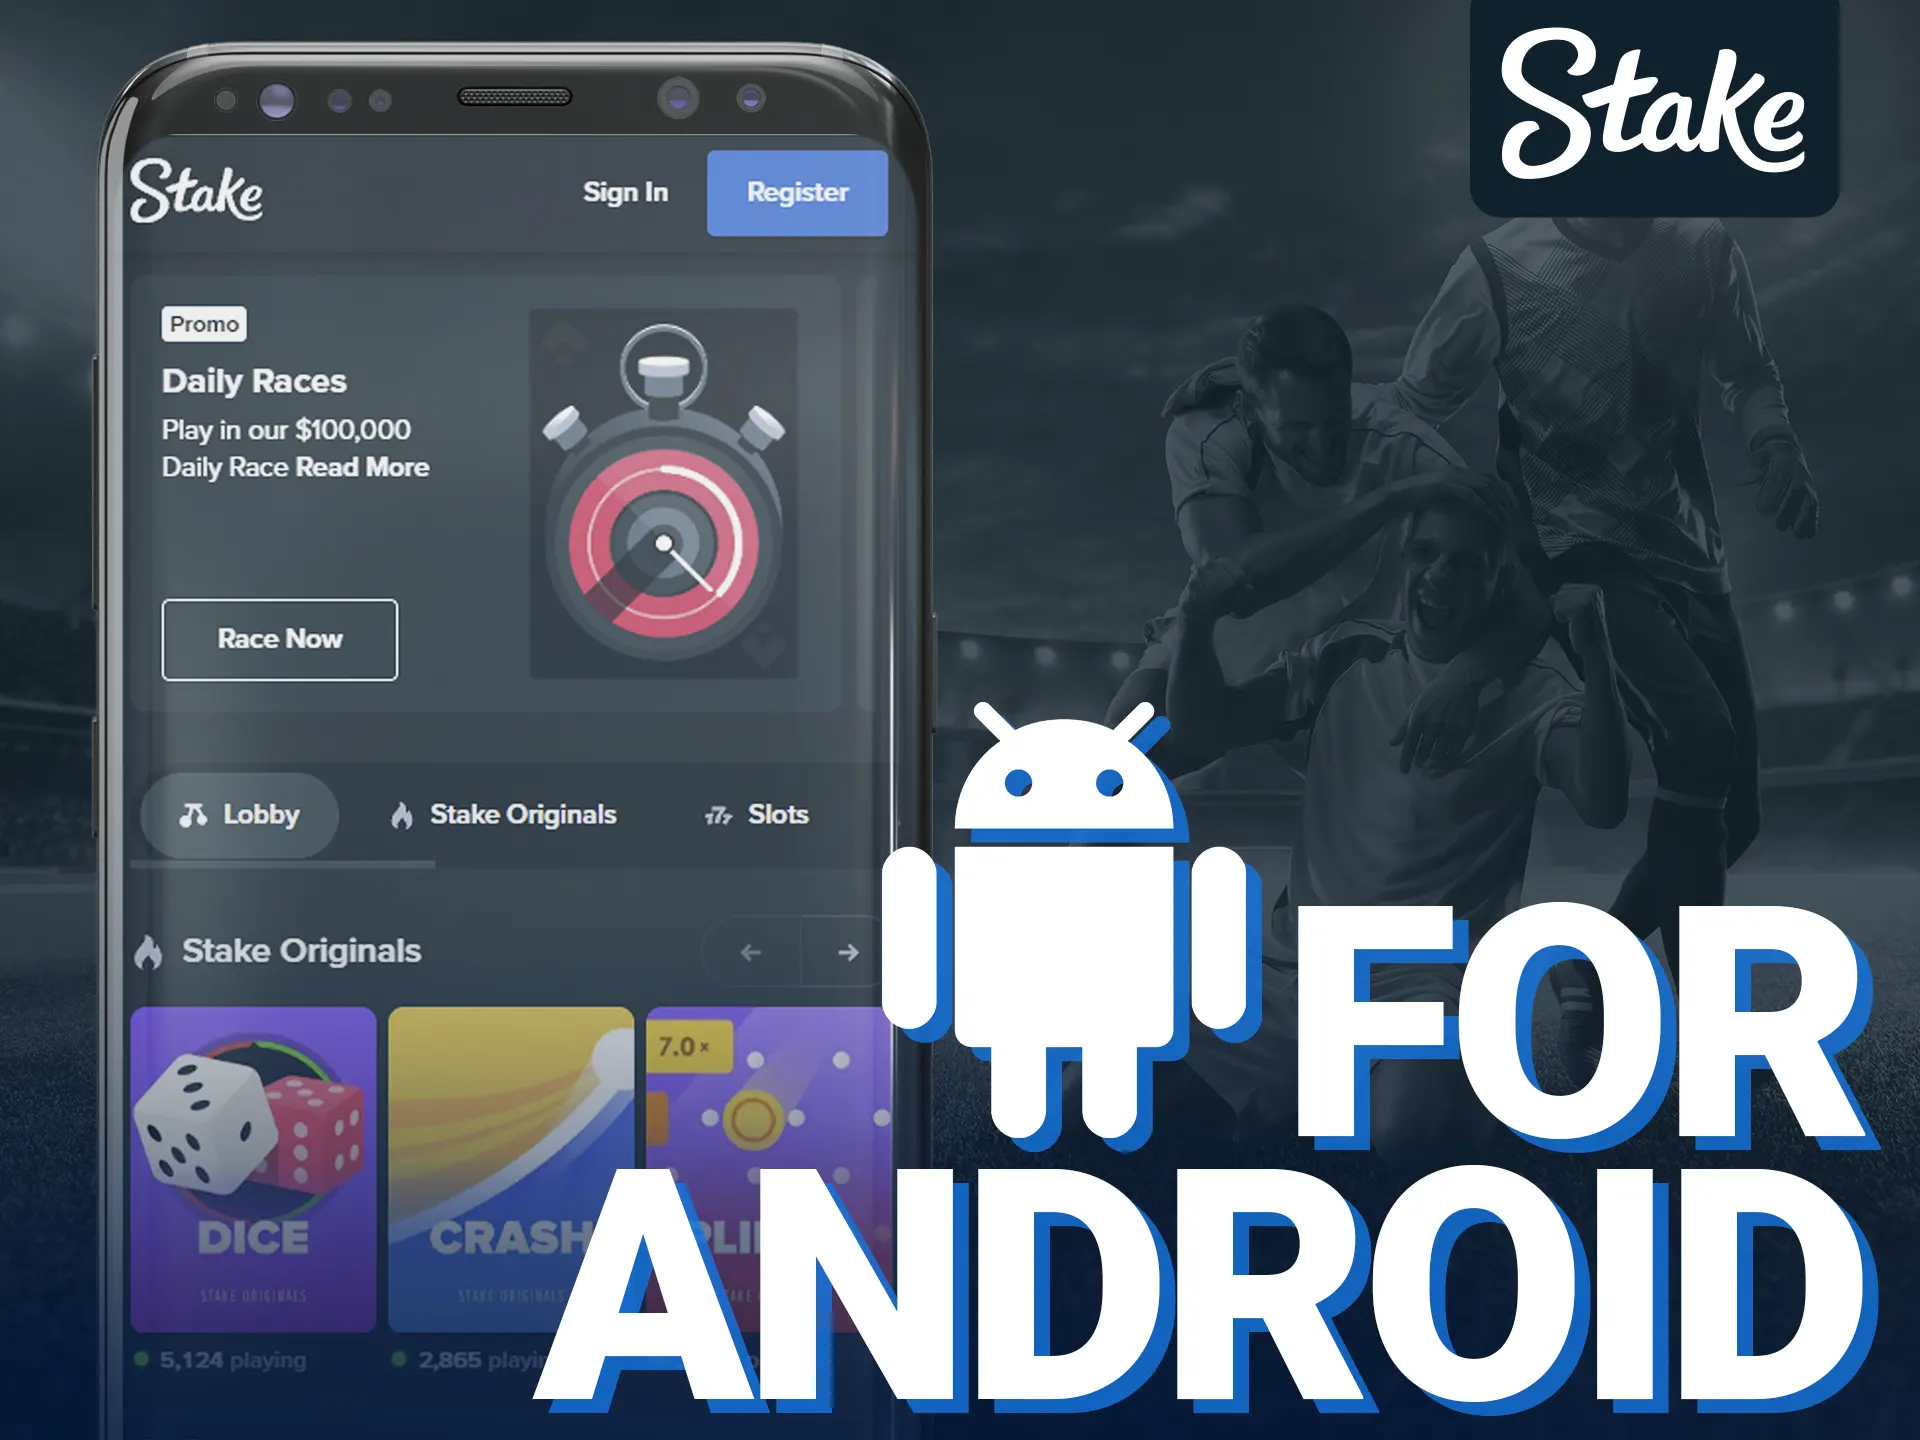 Stake games are accessible on Android via browser.